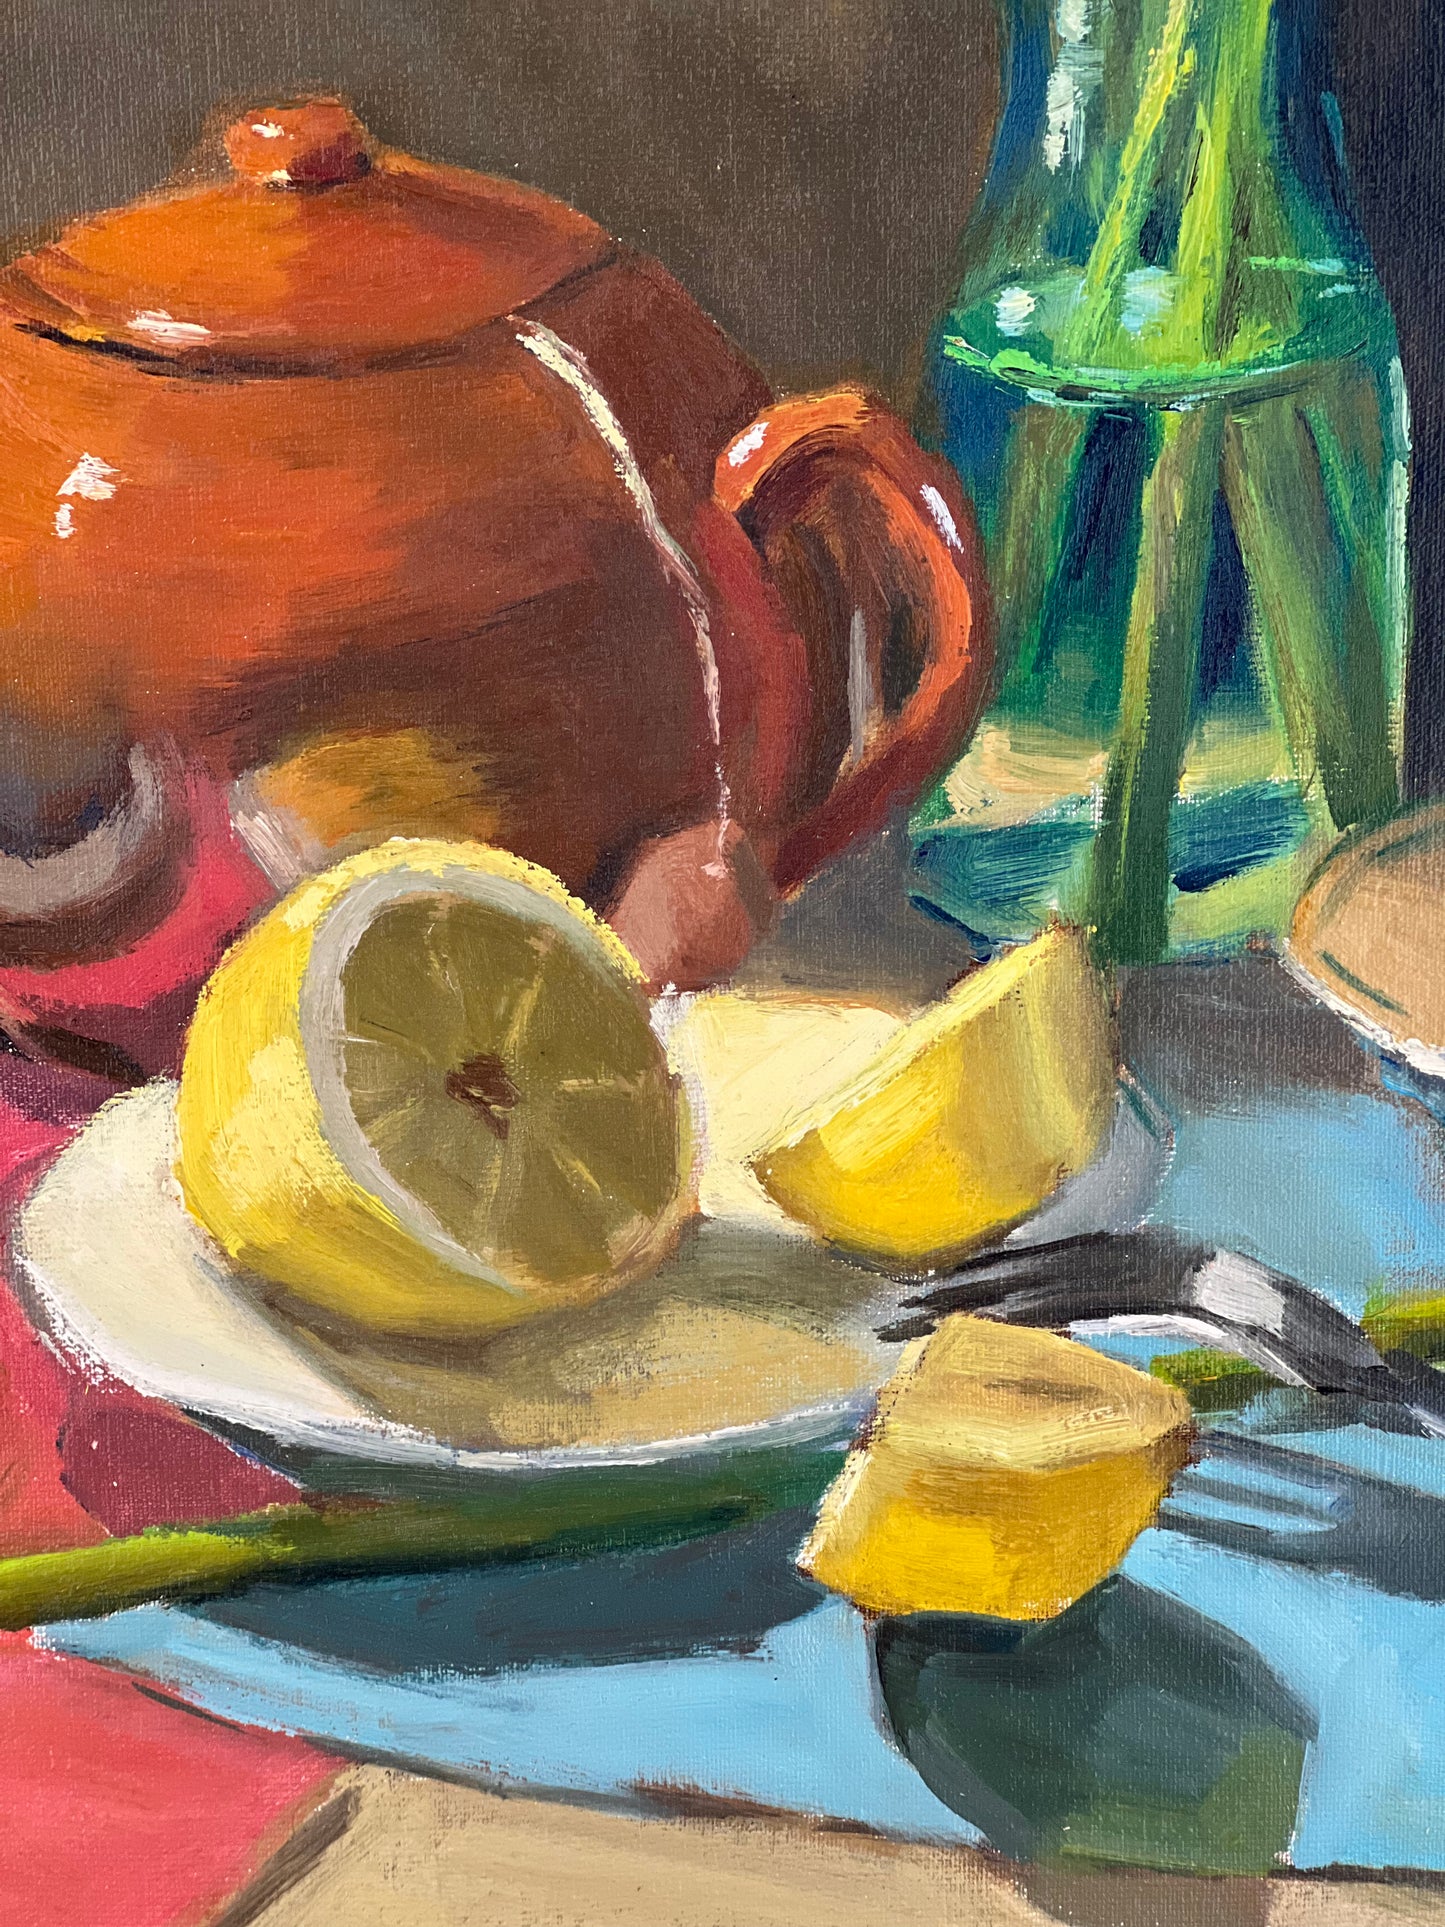 Tea Time with Lemons! - Large Still Life Oil Painting